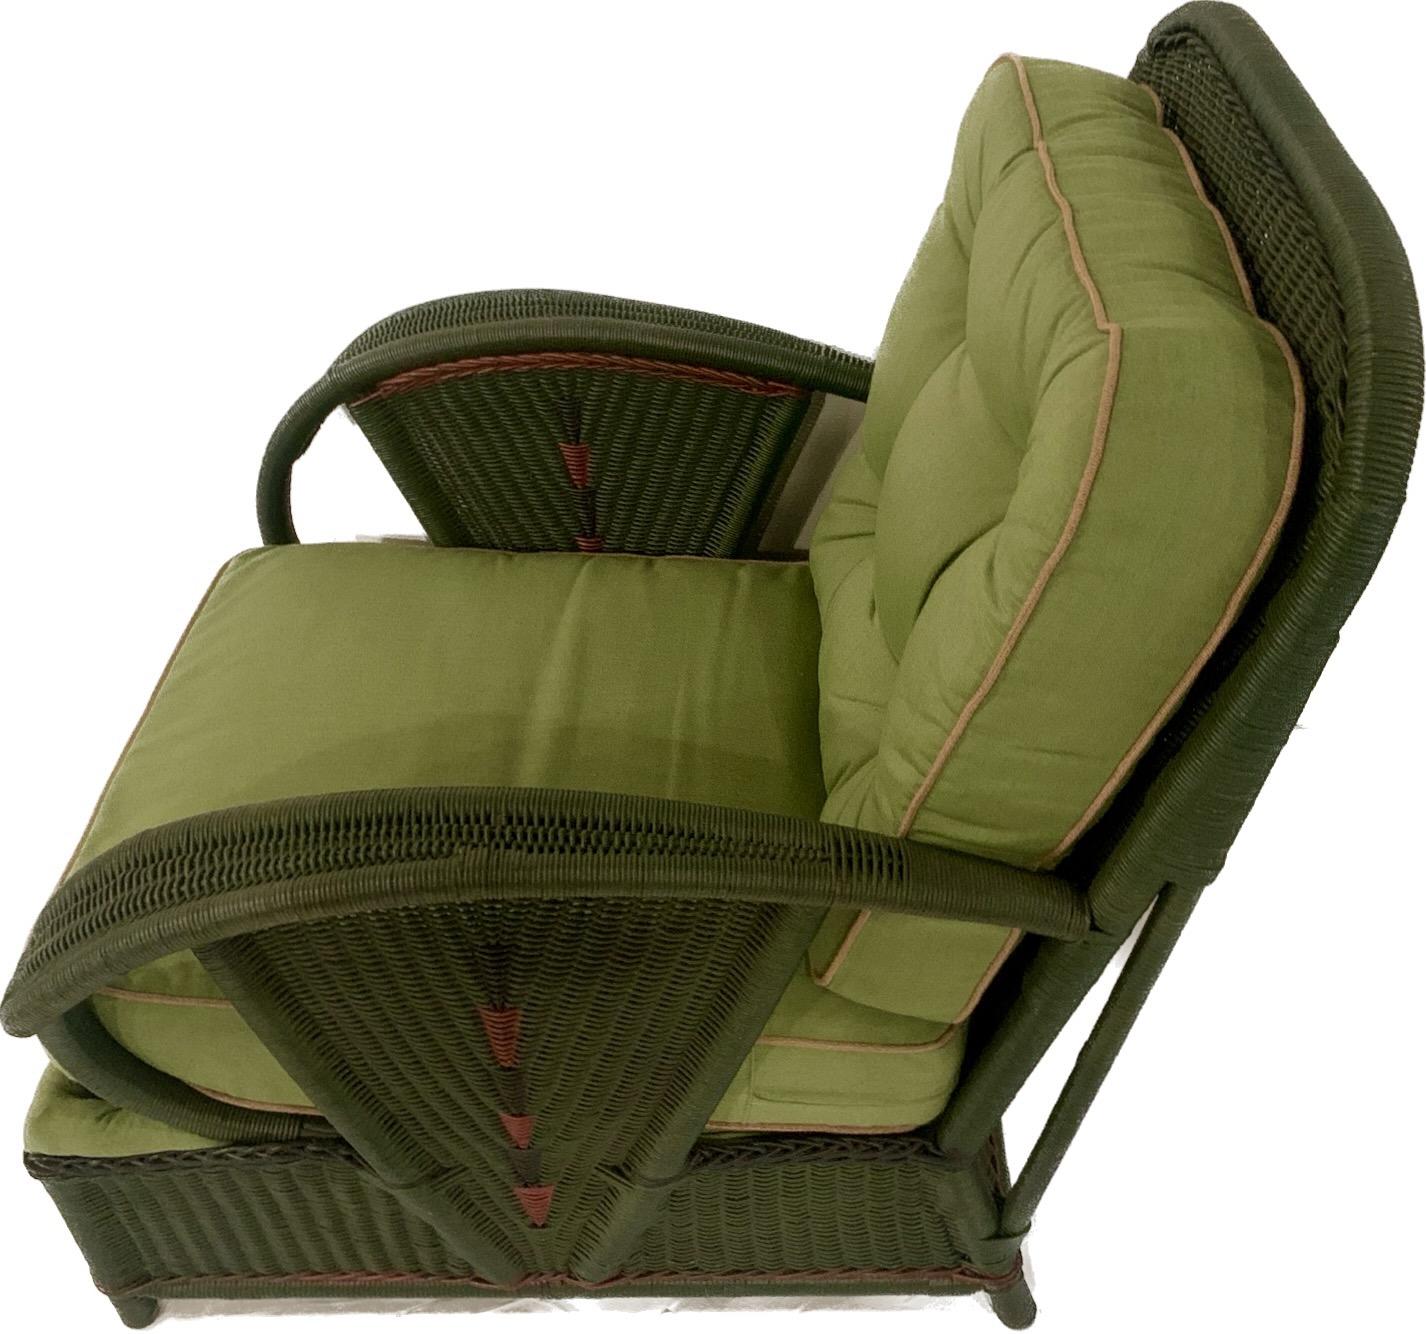 Pair of Green Antique Wicker Art Deco Lounge Chairs with Decorative Trim In Good Condition For Sale In Nashua, NH